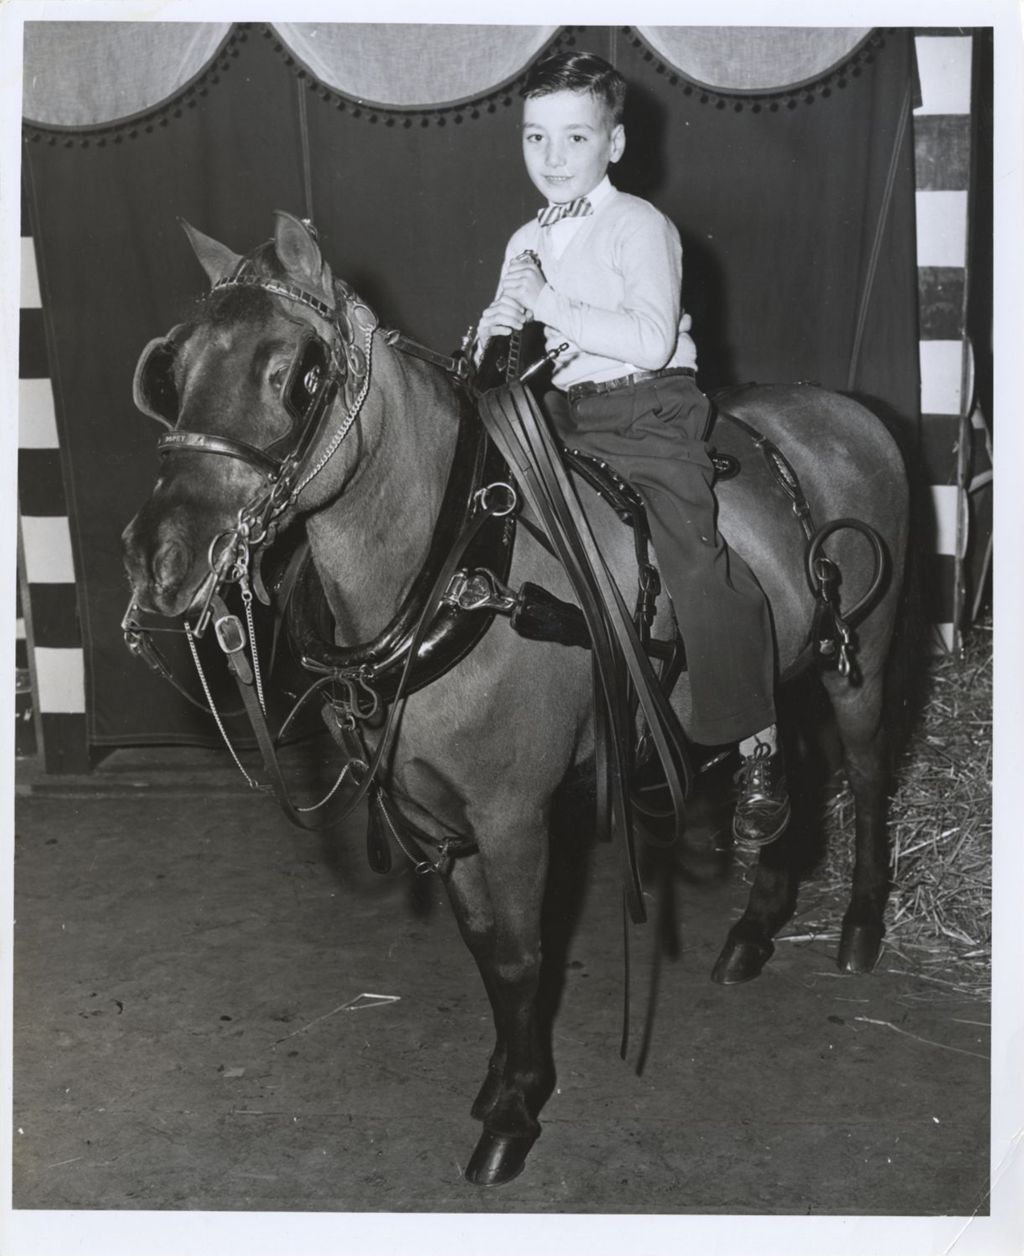 Miniature of William Daley riding a pony at the International Horse show